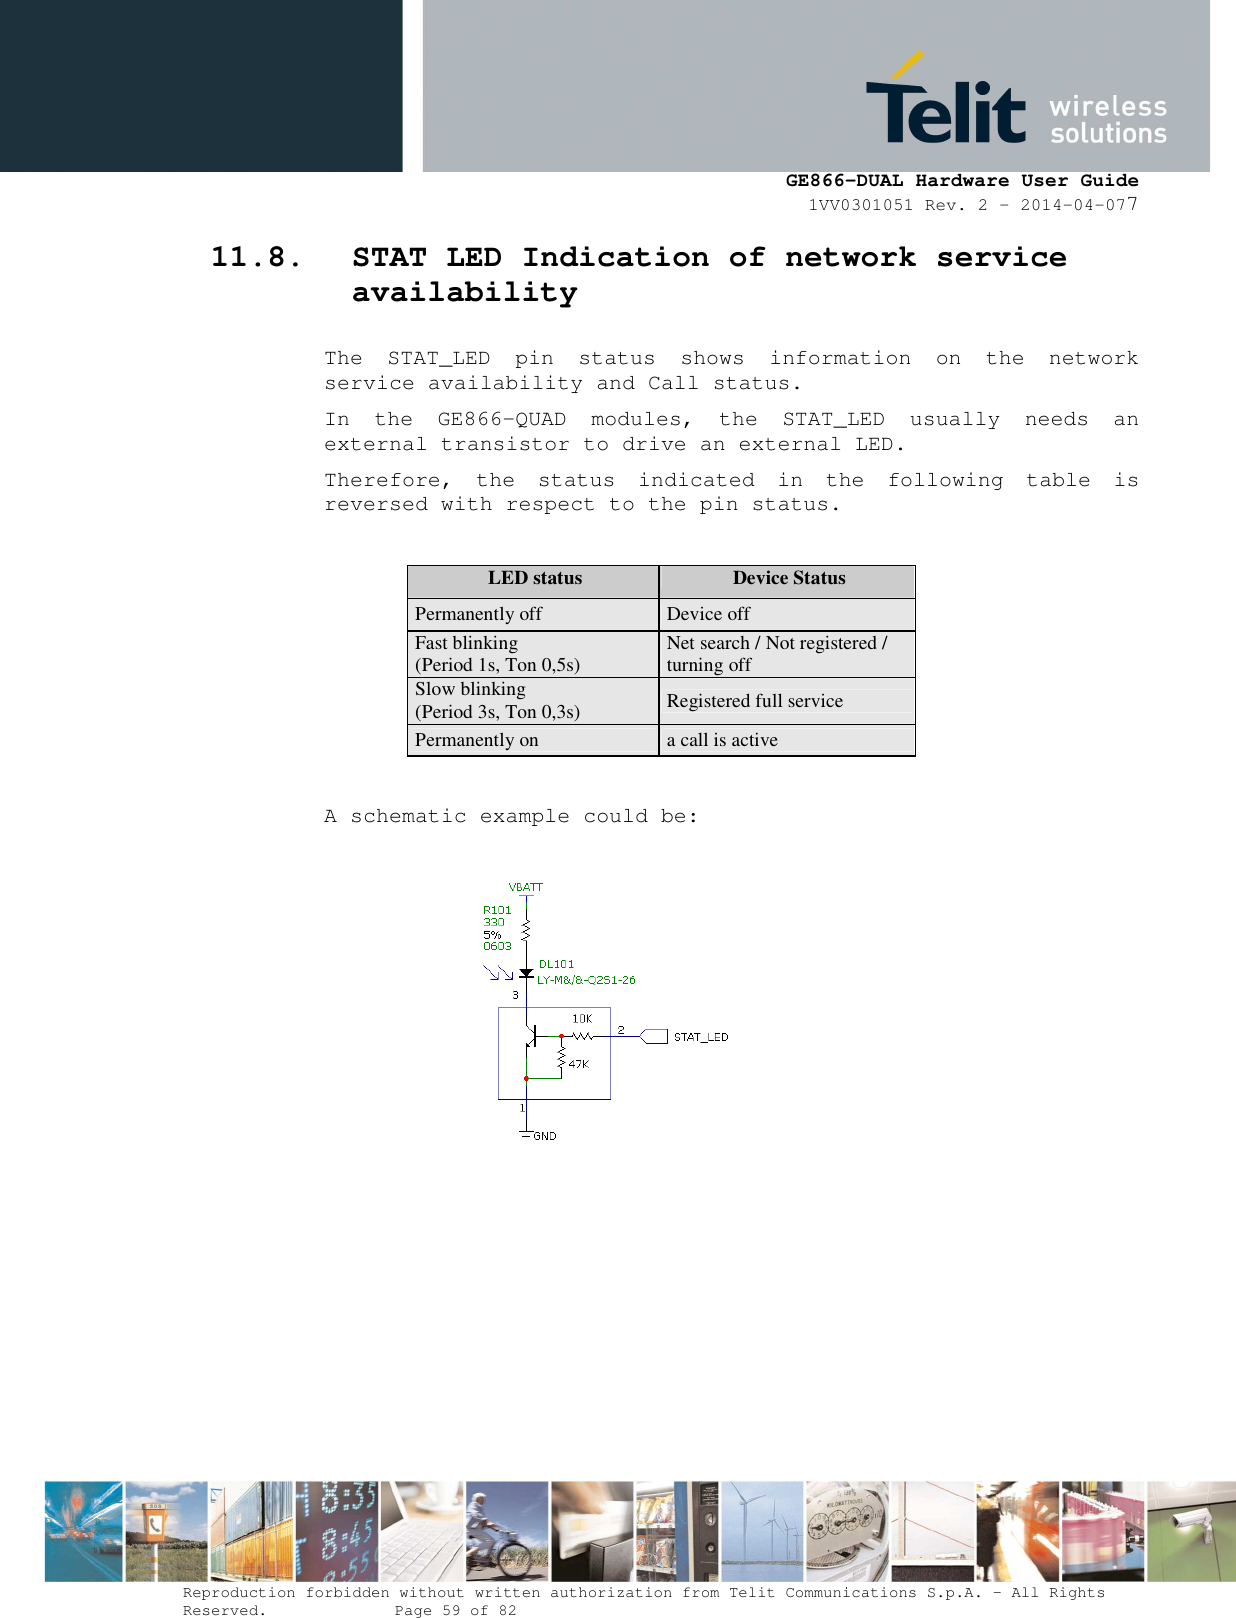      GE866-DUAL Hardware User Guide 1VV0301051 Rev. 2 – 2014-04-077  Reproduction forbidden without written authorization from Telit Communications S.p.A. - All Rights Reserved.    Page 59 of 82 Mod. 0805 2011-07 Rev.2 11.8. STAT LED Indication of network service availability The  STAT_LED  pin  status  shows  information  on  the  network service availability and Call status.  In  the  GE866-QUAD  modules,  the  STAT_LED  usually  needs  an external transistor to drive an external LED. Therefore,  the  status  indicated  in  the  following  table  is reversed with respect to the pin status.  LED status  Device Status Permanently off  Device off Fast blinking (Period 1s, Ton 0,5s)  Net search / Not registered / turning off Slow blinking (Period 3s, Ton 0,3s)  Registered full service Permanently on  a call is active  A schematic example could be:            